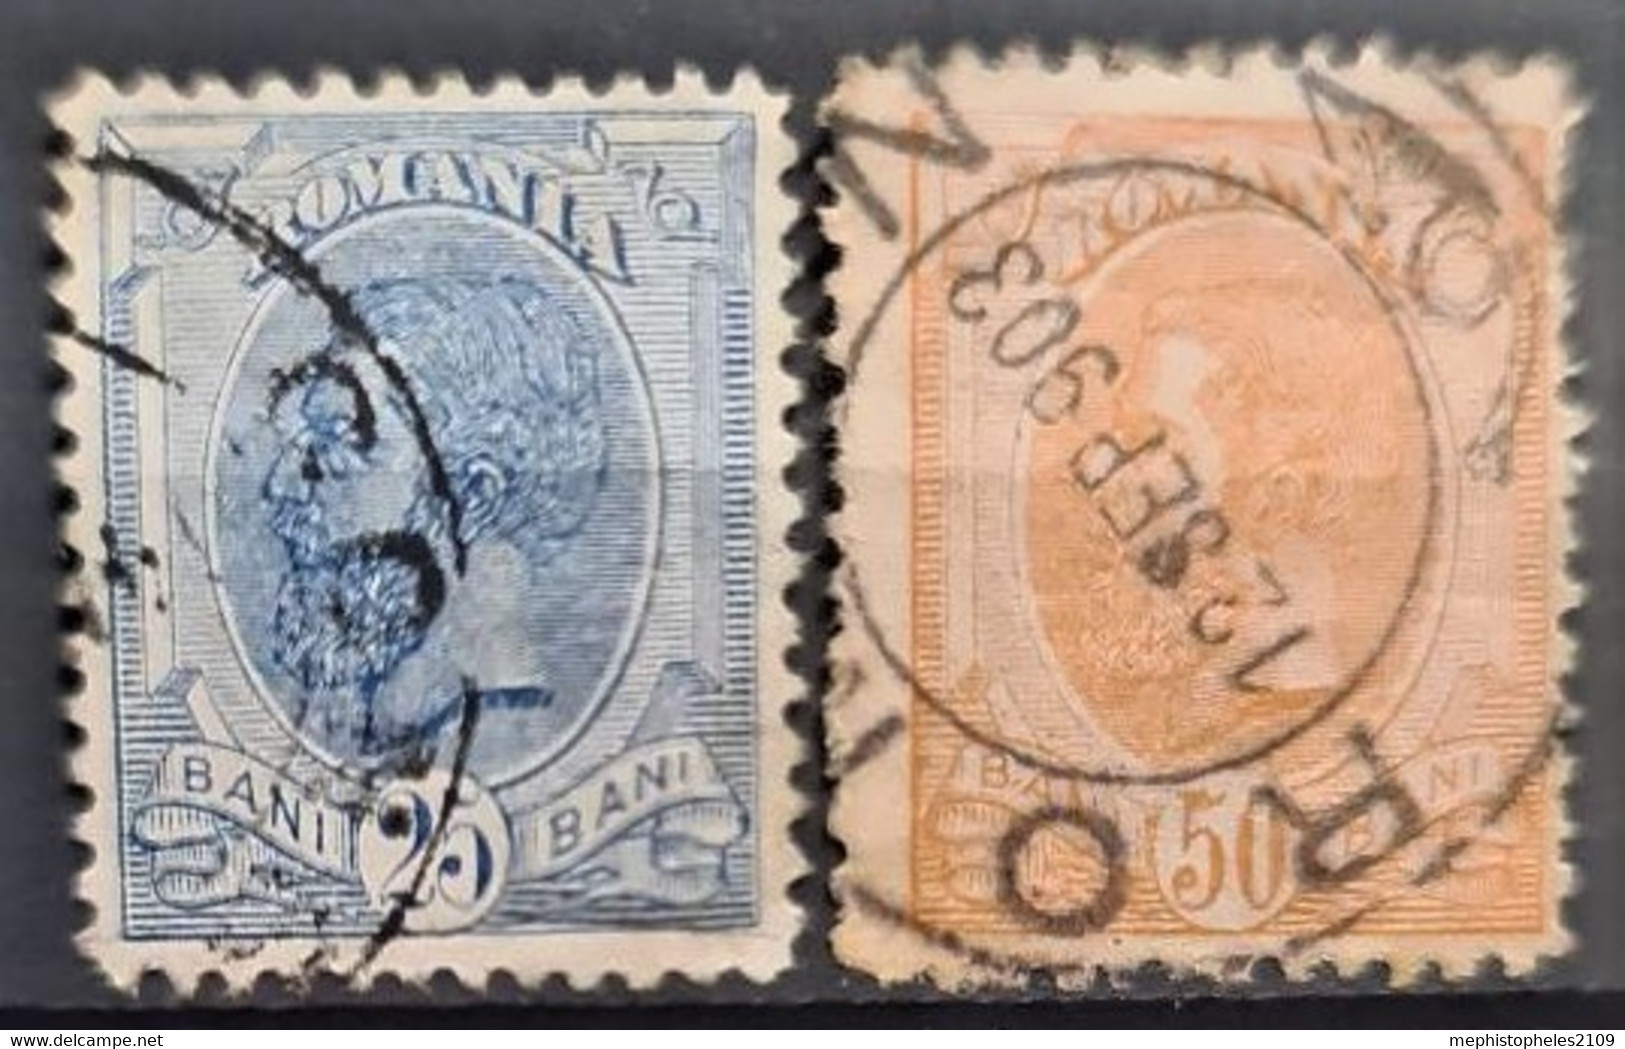 ROMANIA 1893/98 - Canceled - Sc# 127, 129 - Used Stamps